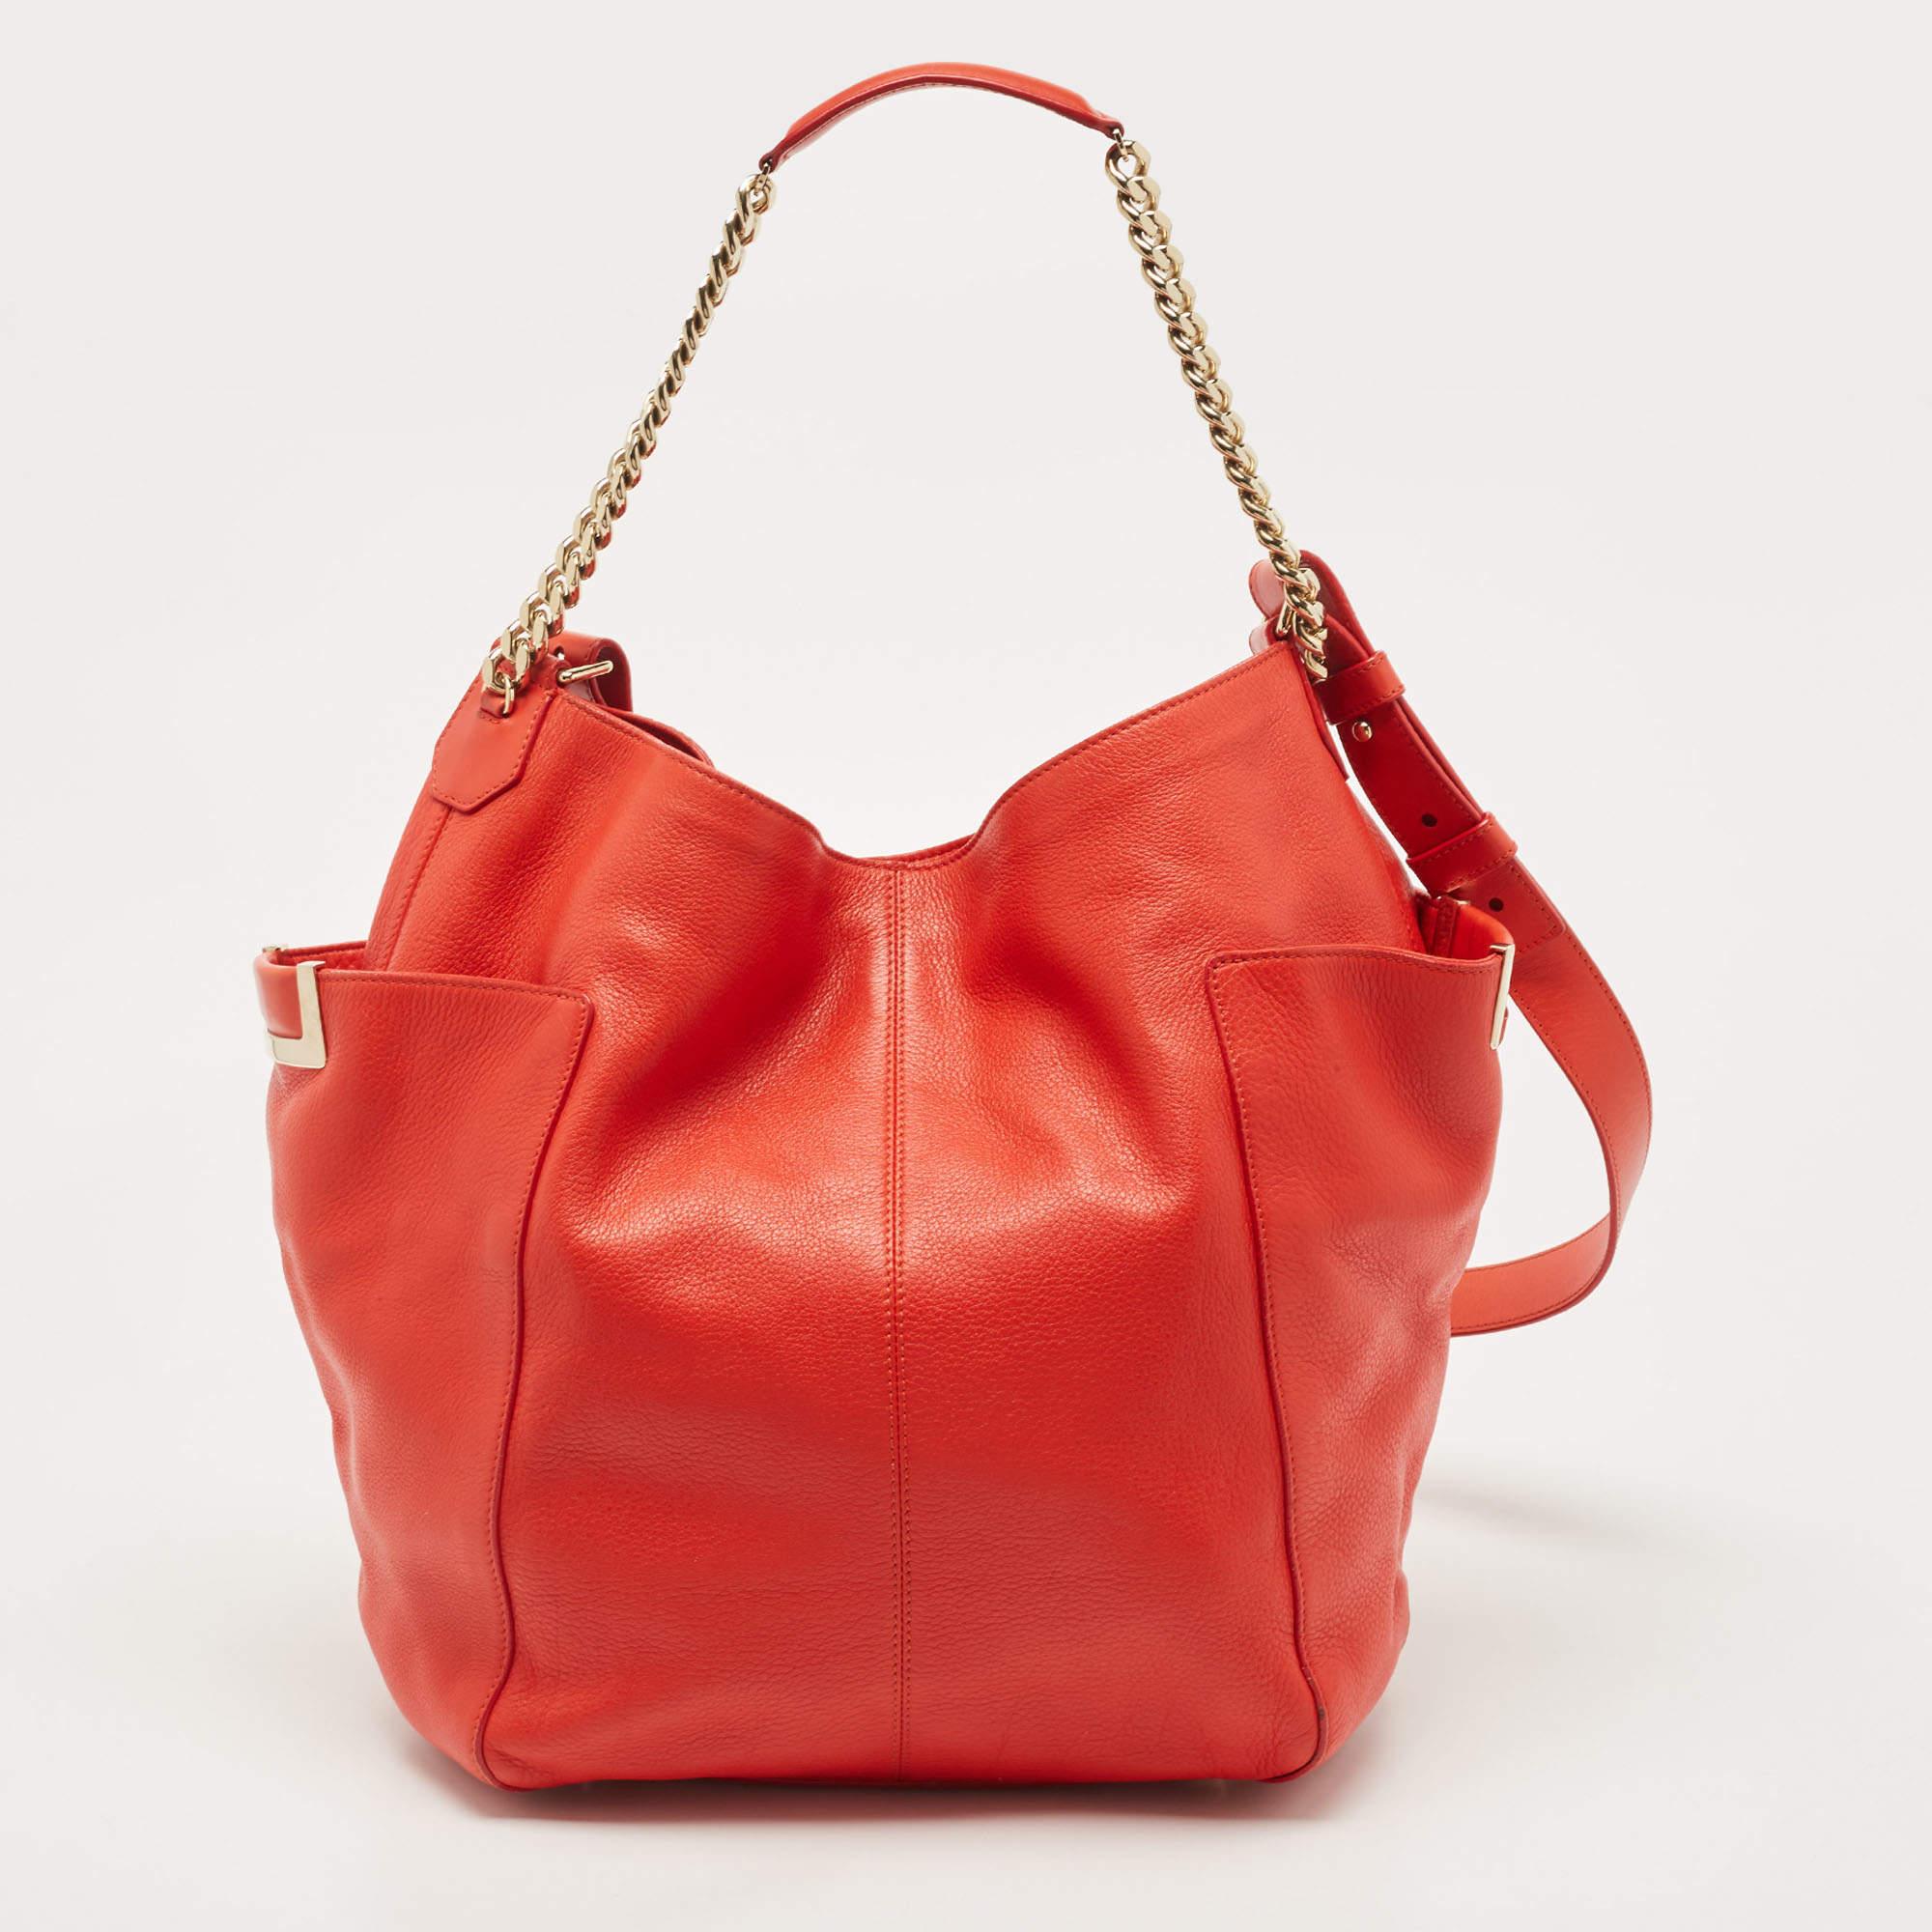 Stylish handbags never fail to make a fashionable impression. Make this designer hobo yours by pairing it with your sophisticated workwear as well as chic casual looks.


Includes
Original Dustbag